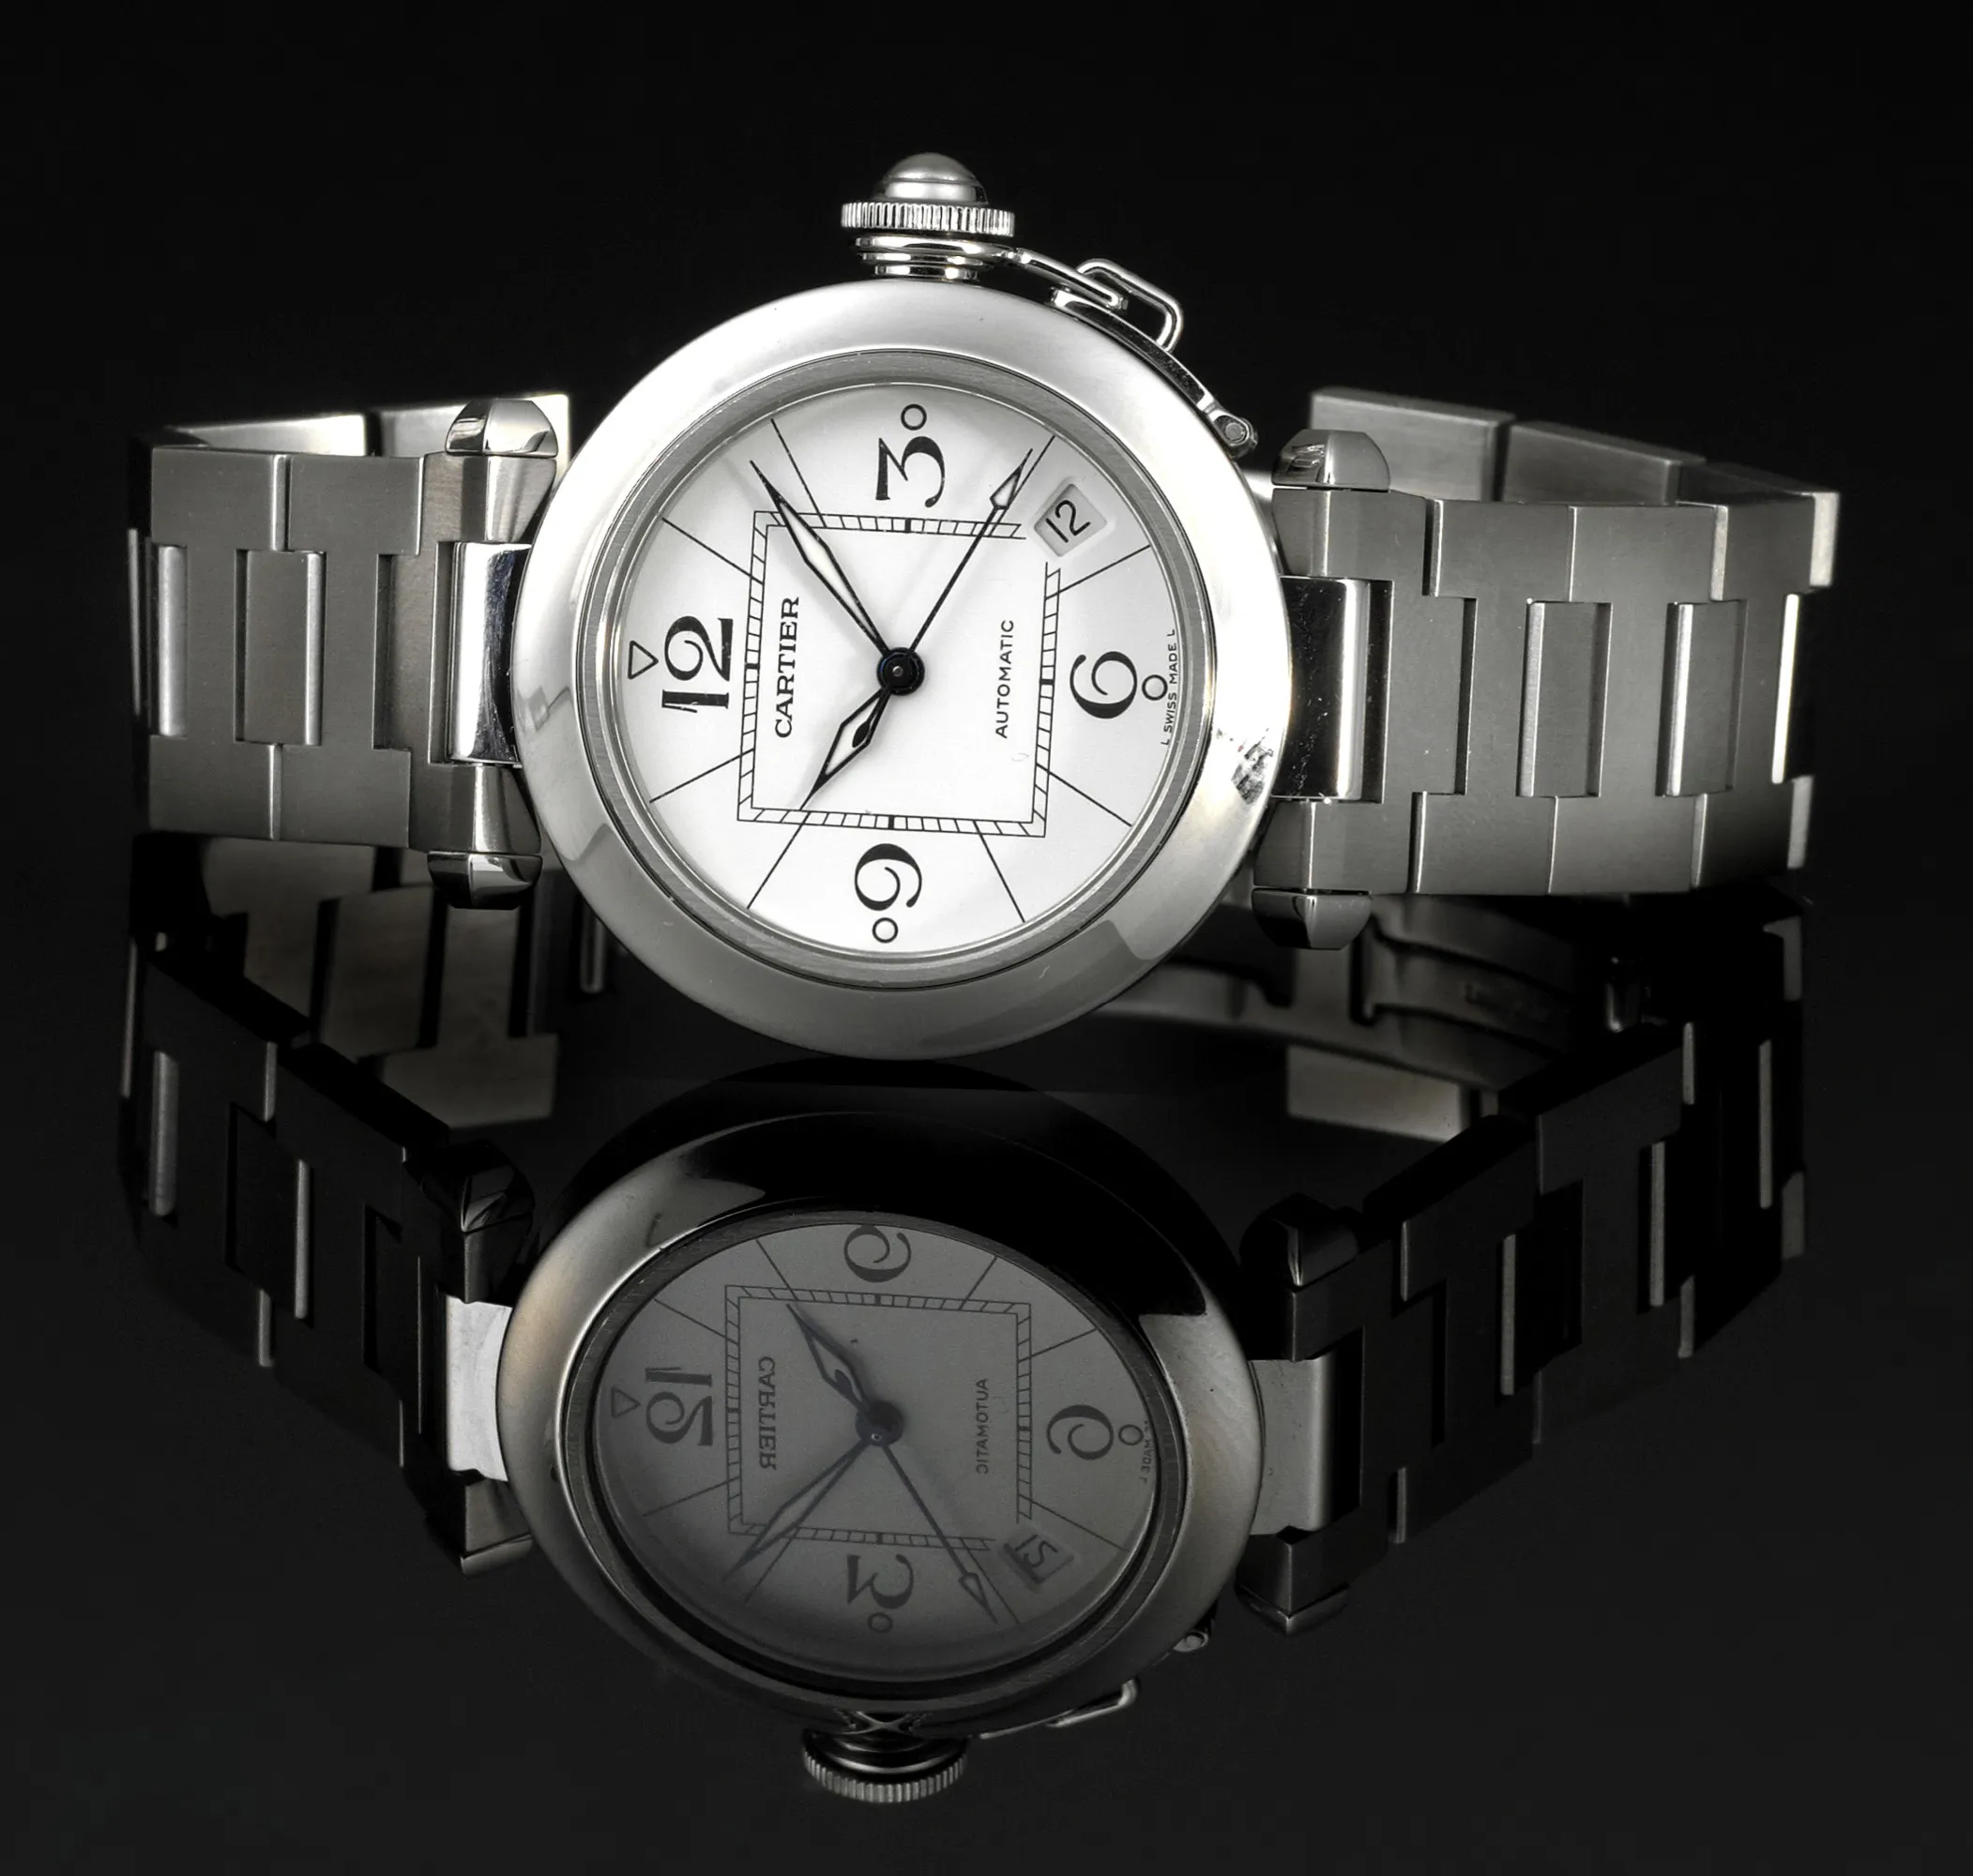 Cartier Pasha 2324 36mm Stainless steel White